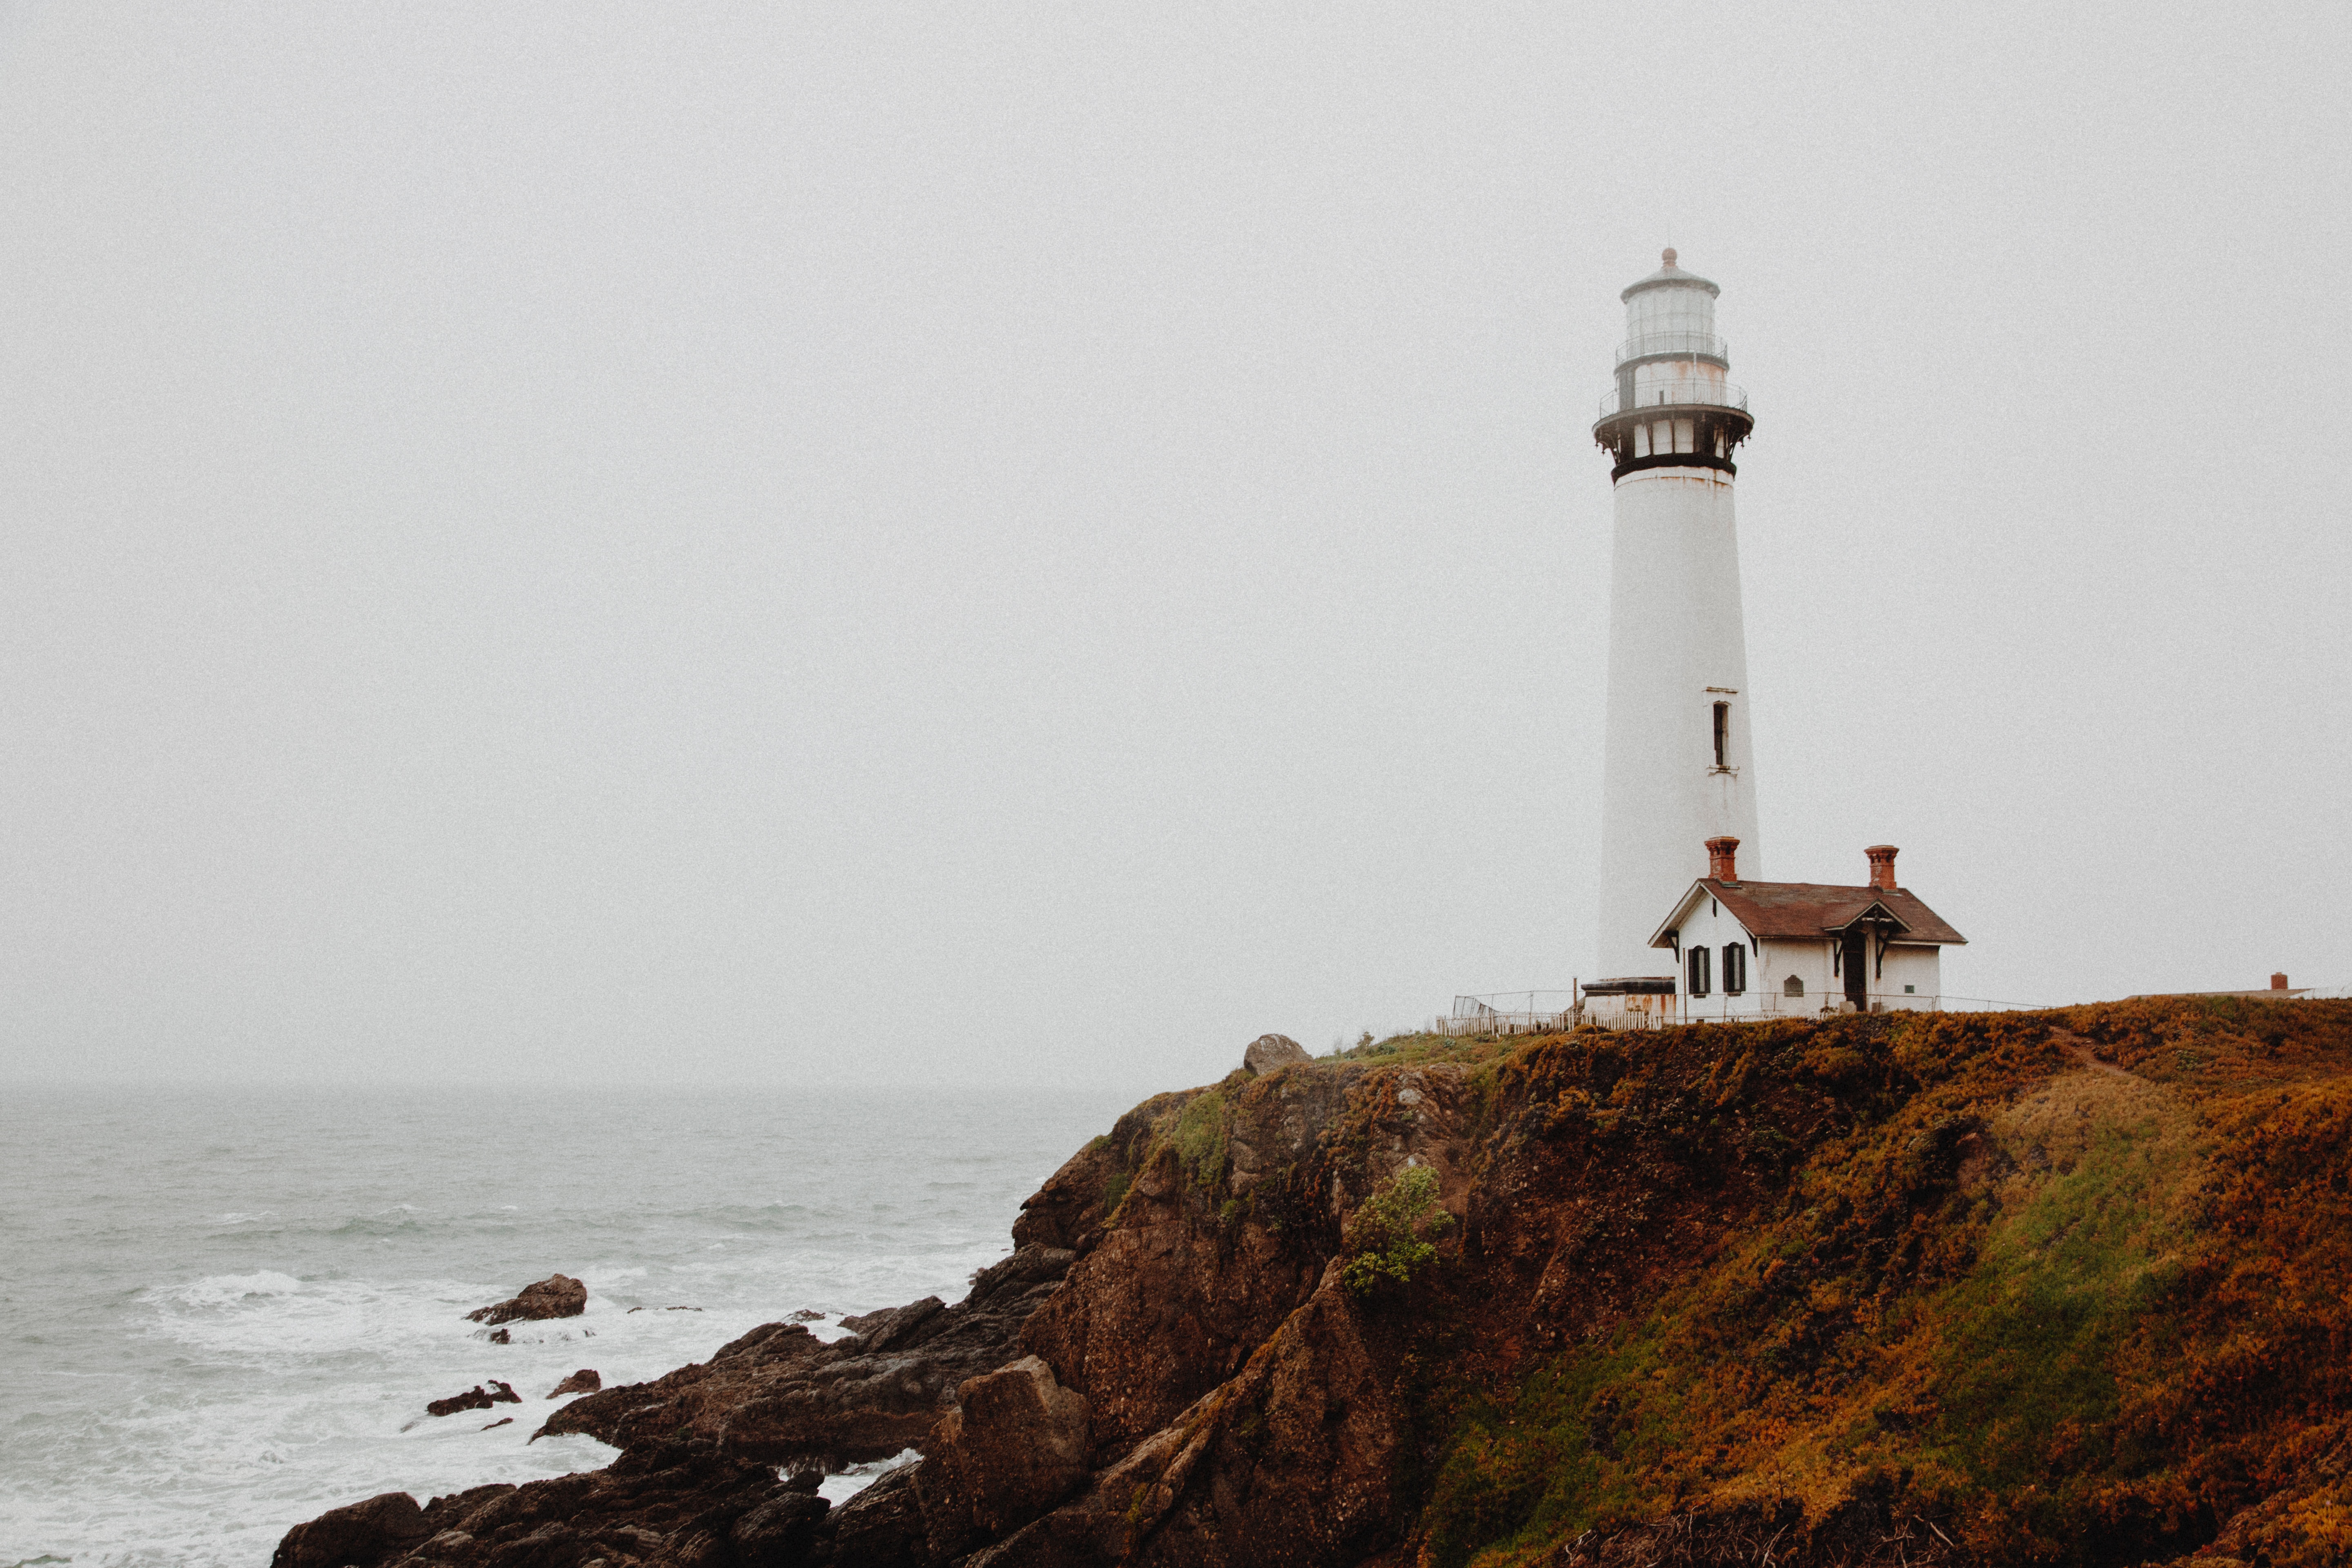 A lighthouse on a rocky ocean shore in overcast skies